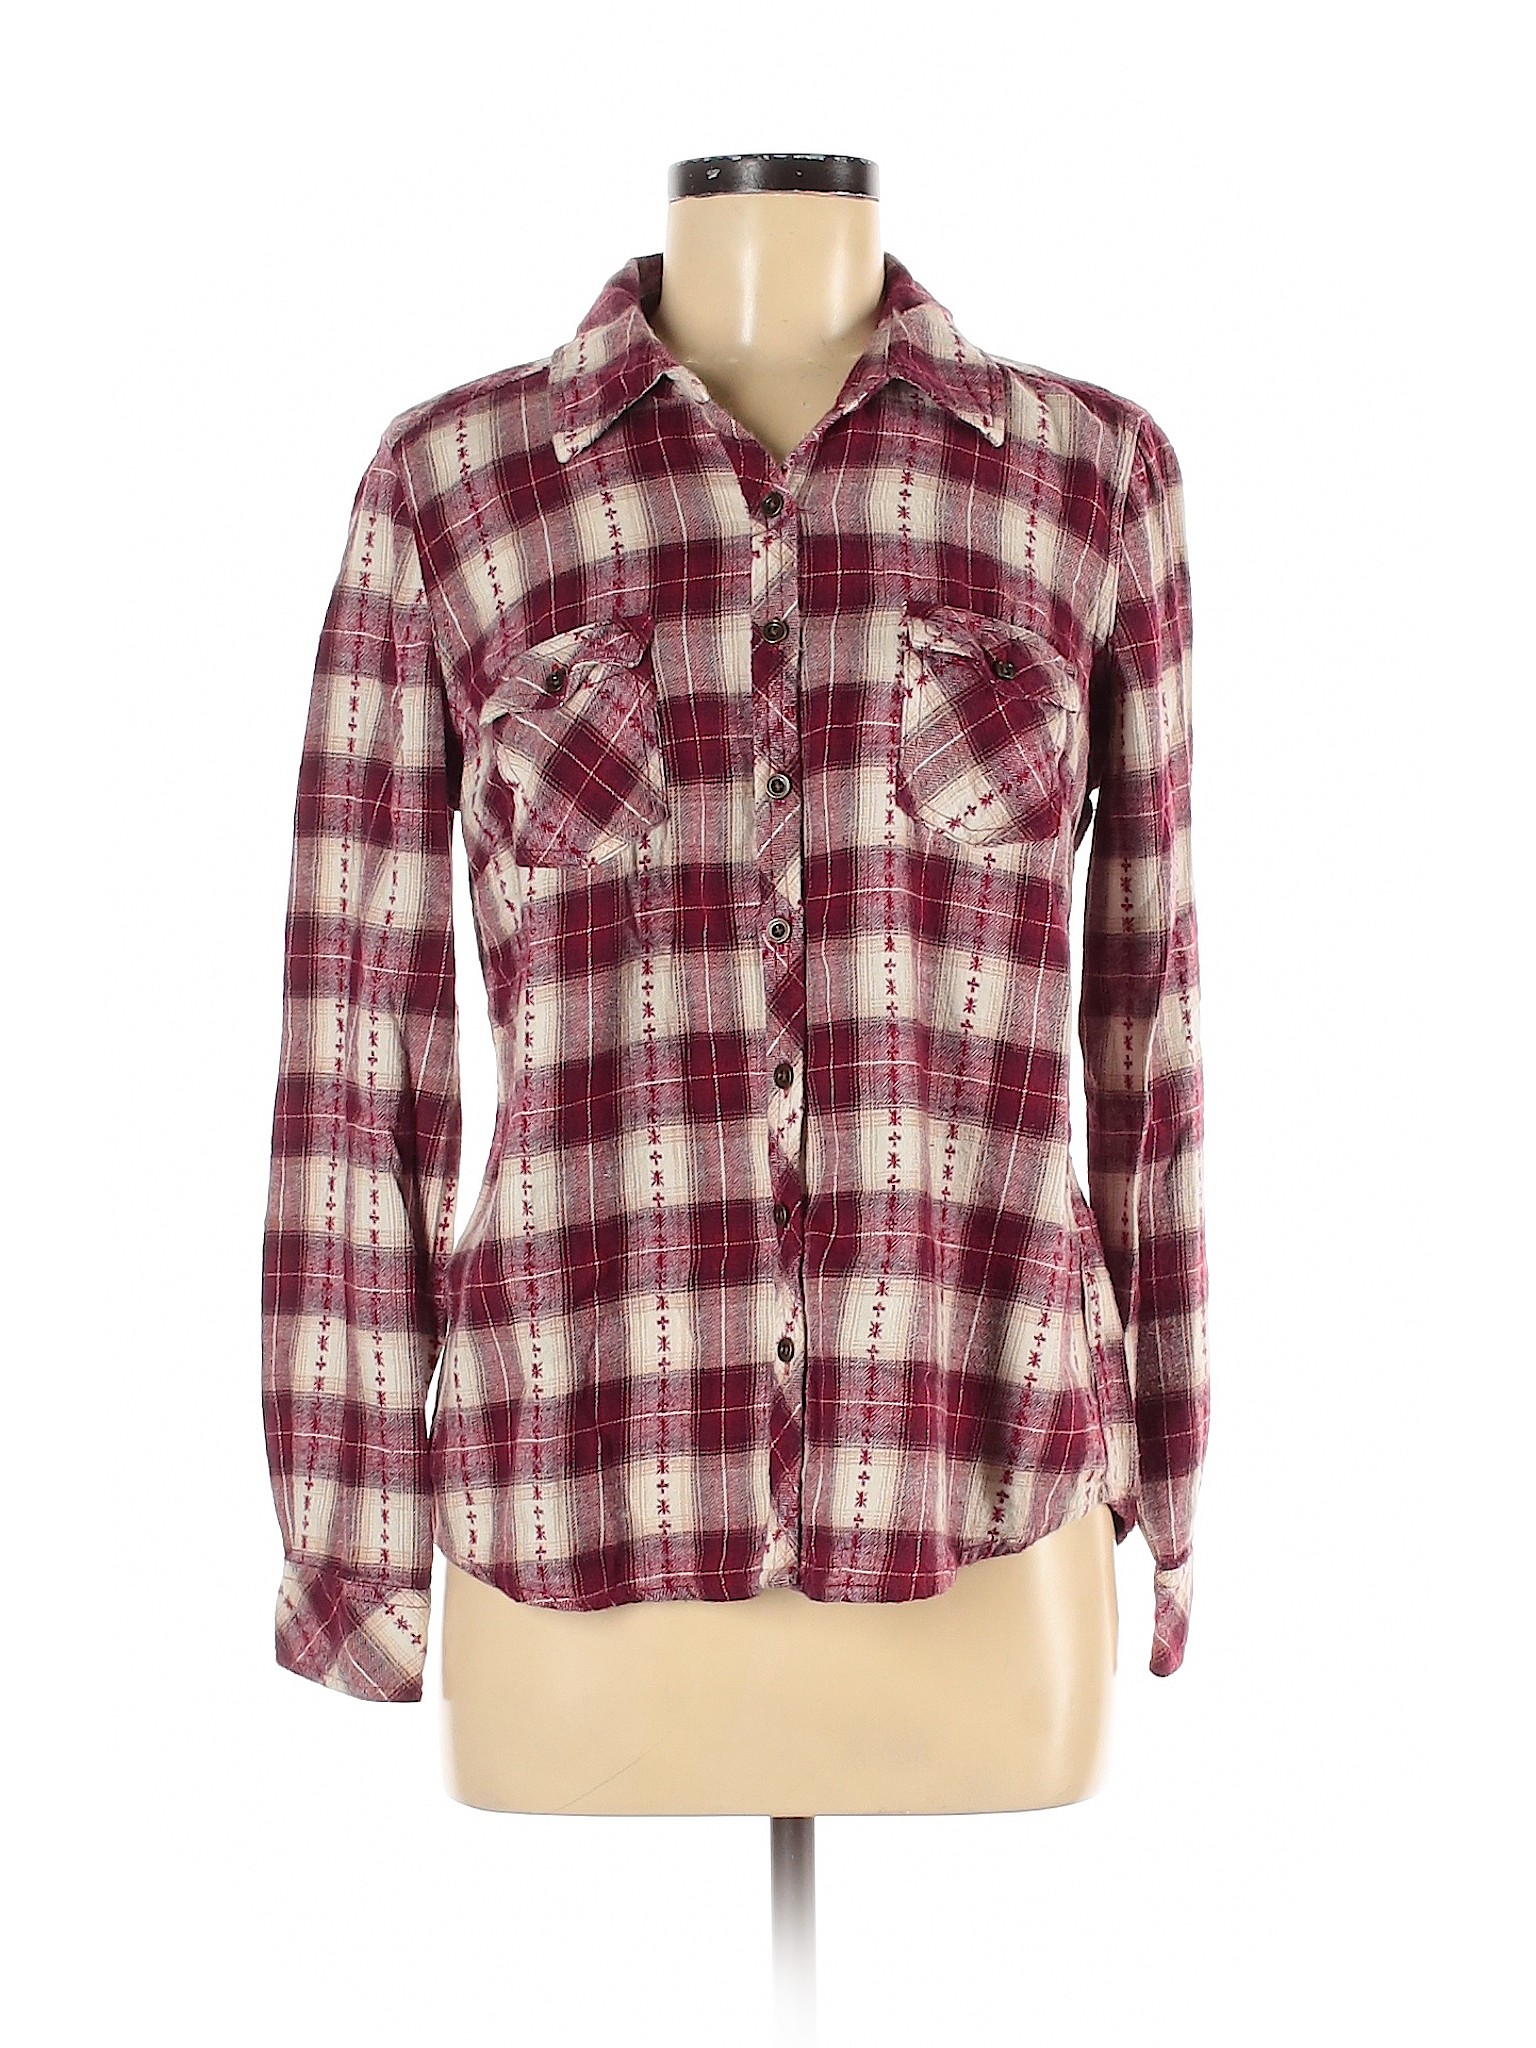 SONOMA life + style Women Red Long Sleeve Button-Down Shirt M | eBay